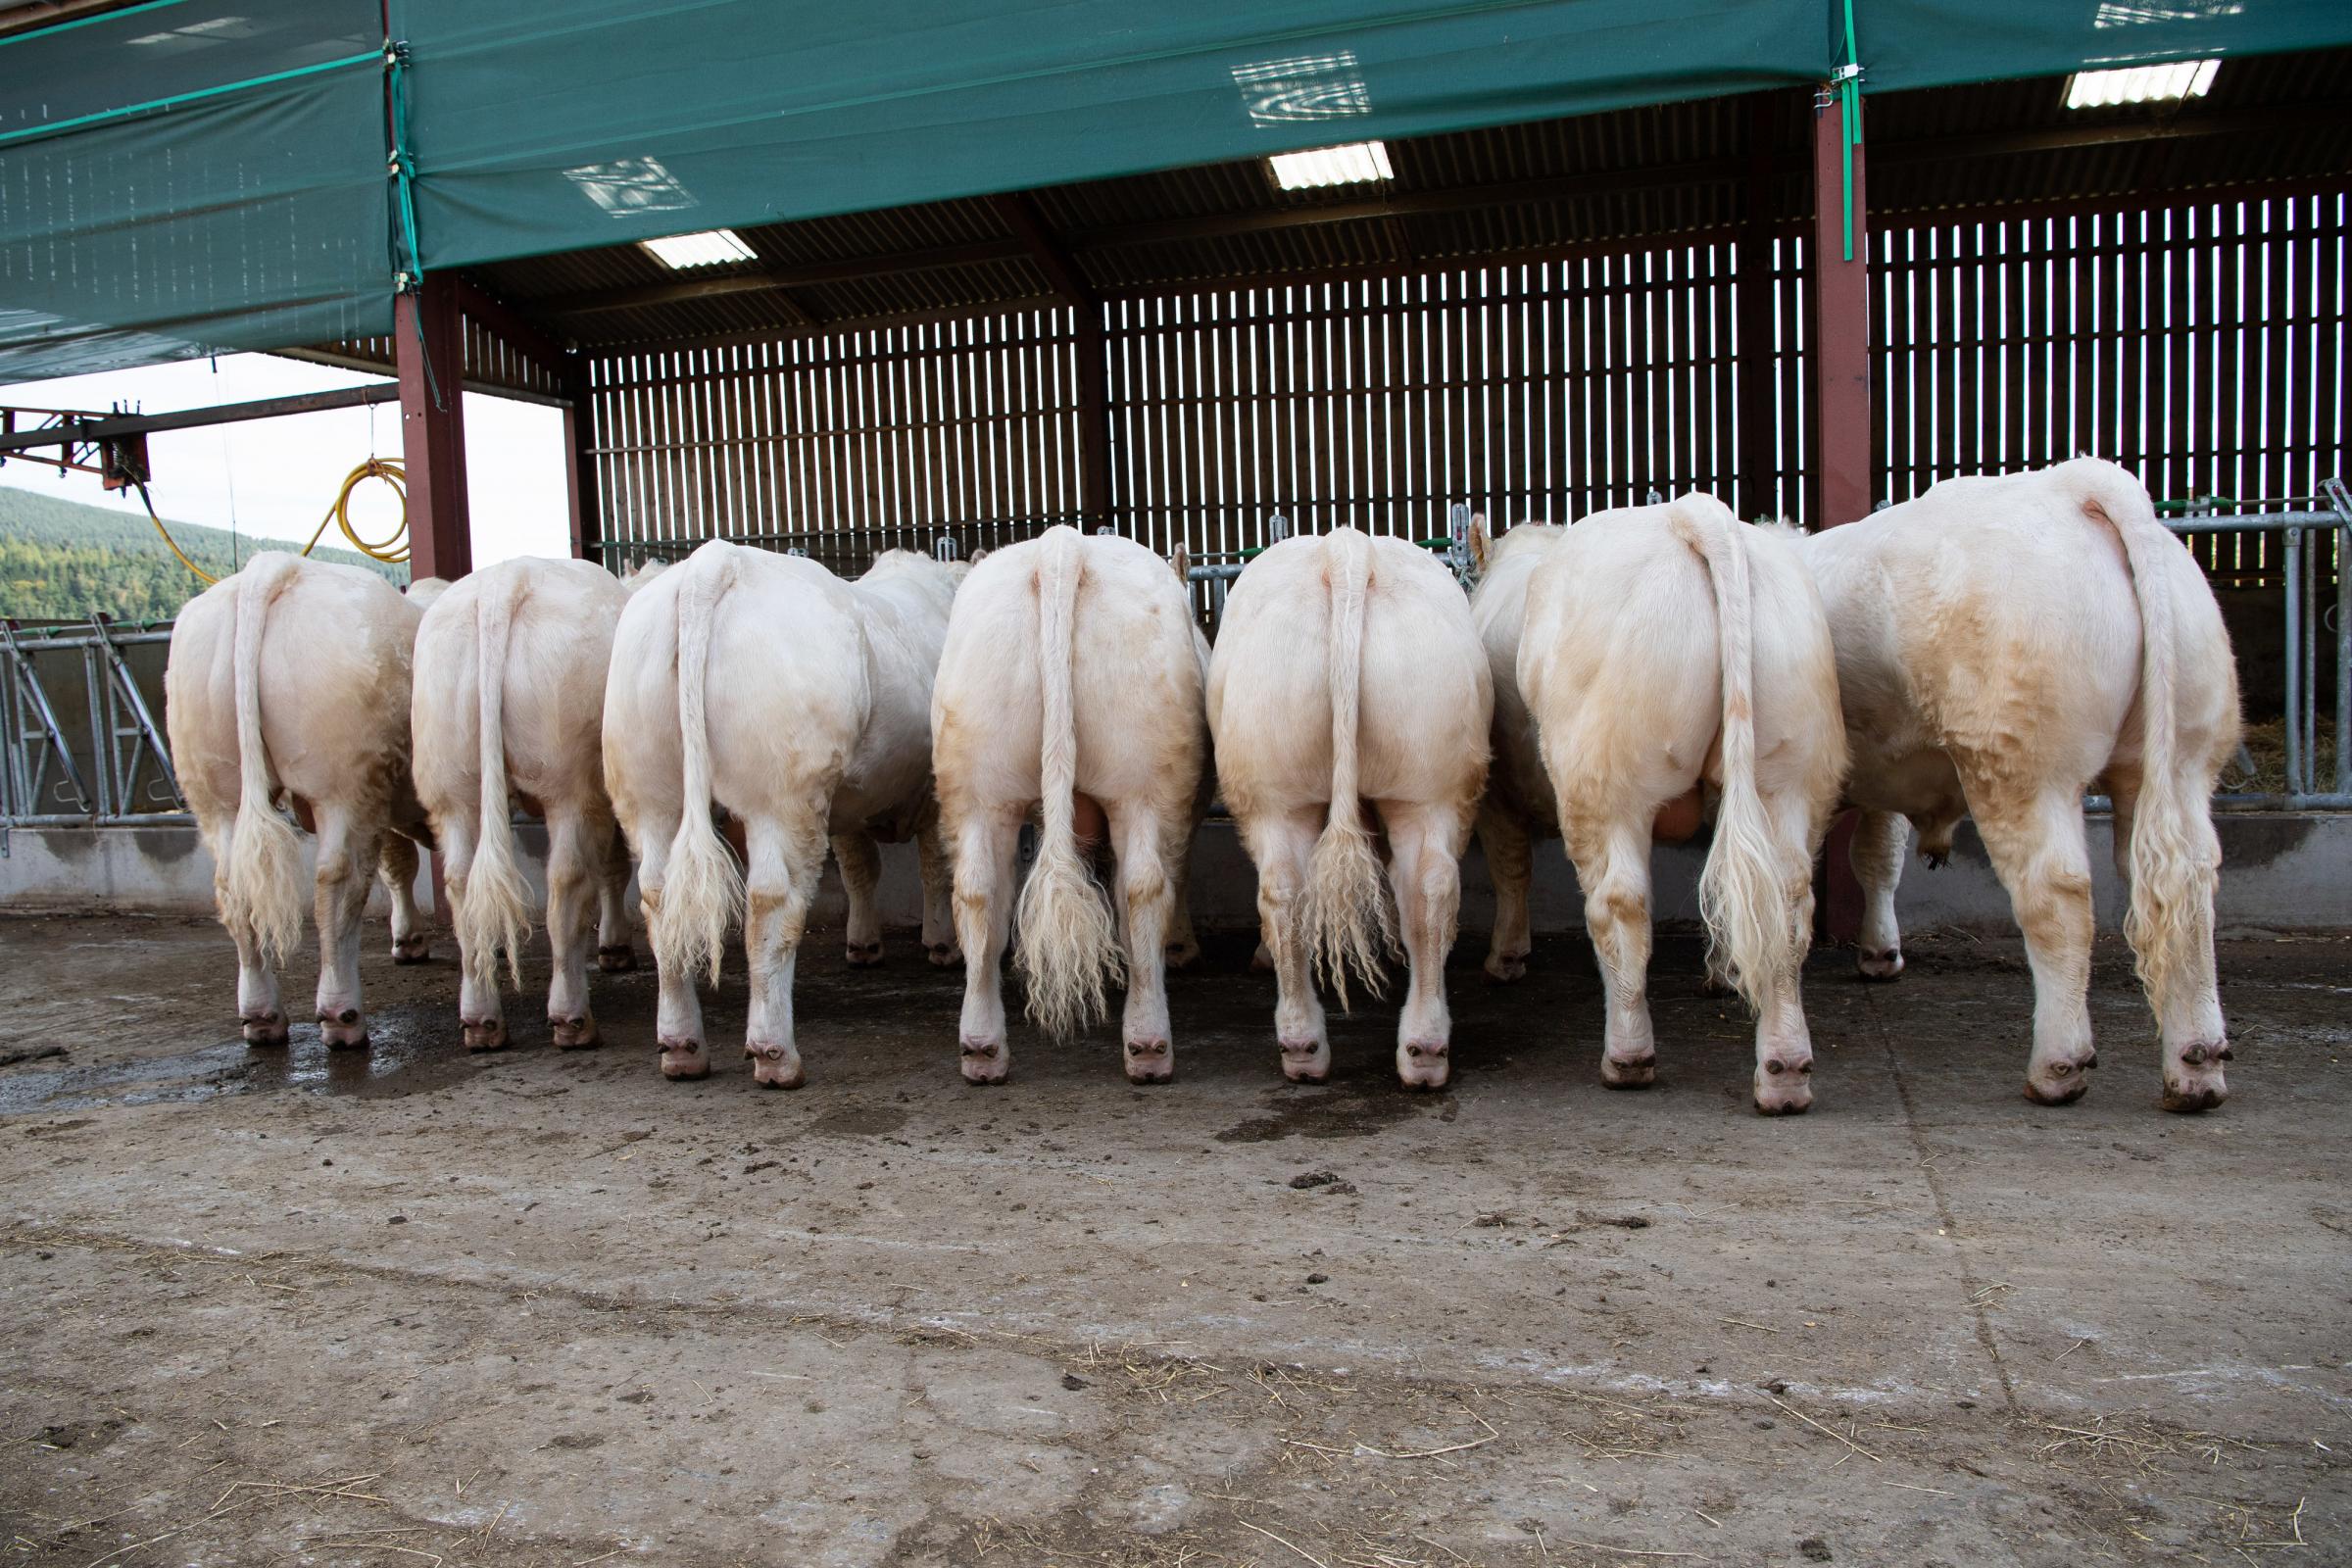 2020 batch of Glenernan bulls for sale (L-R) RUNAROUND, ROMAN, ROMEO, ROLO, RAMBO, ROD and ROCKET. Rocket is for sale privately and the rest are bound for Stirling Ref:RH240921083 Rob Haining / The Scottish Farmer...